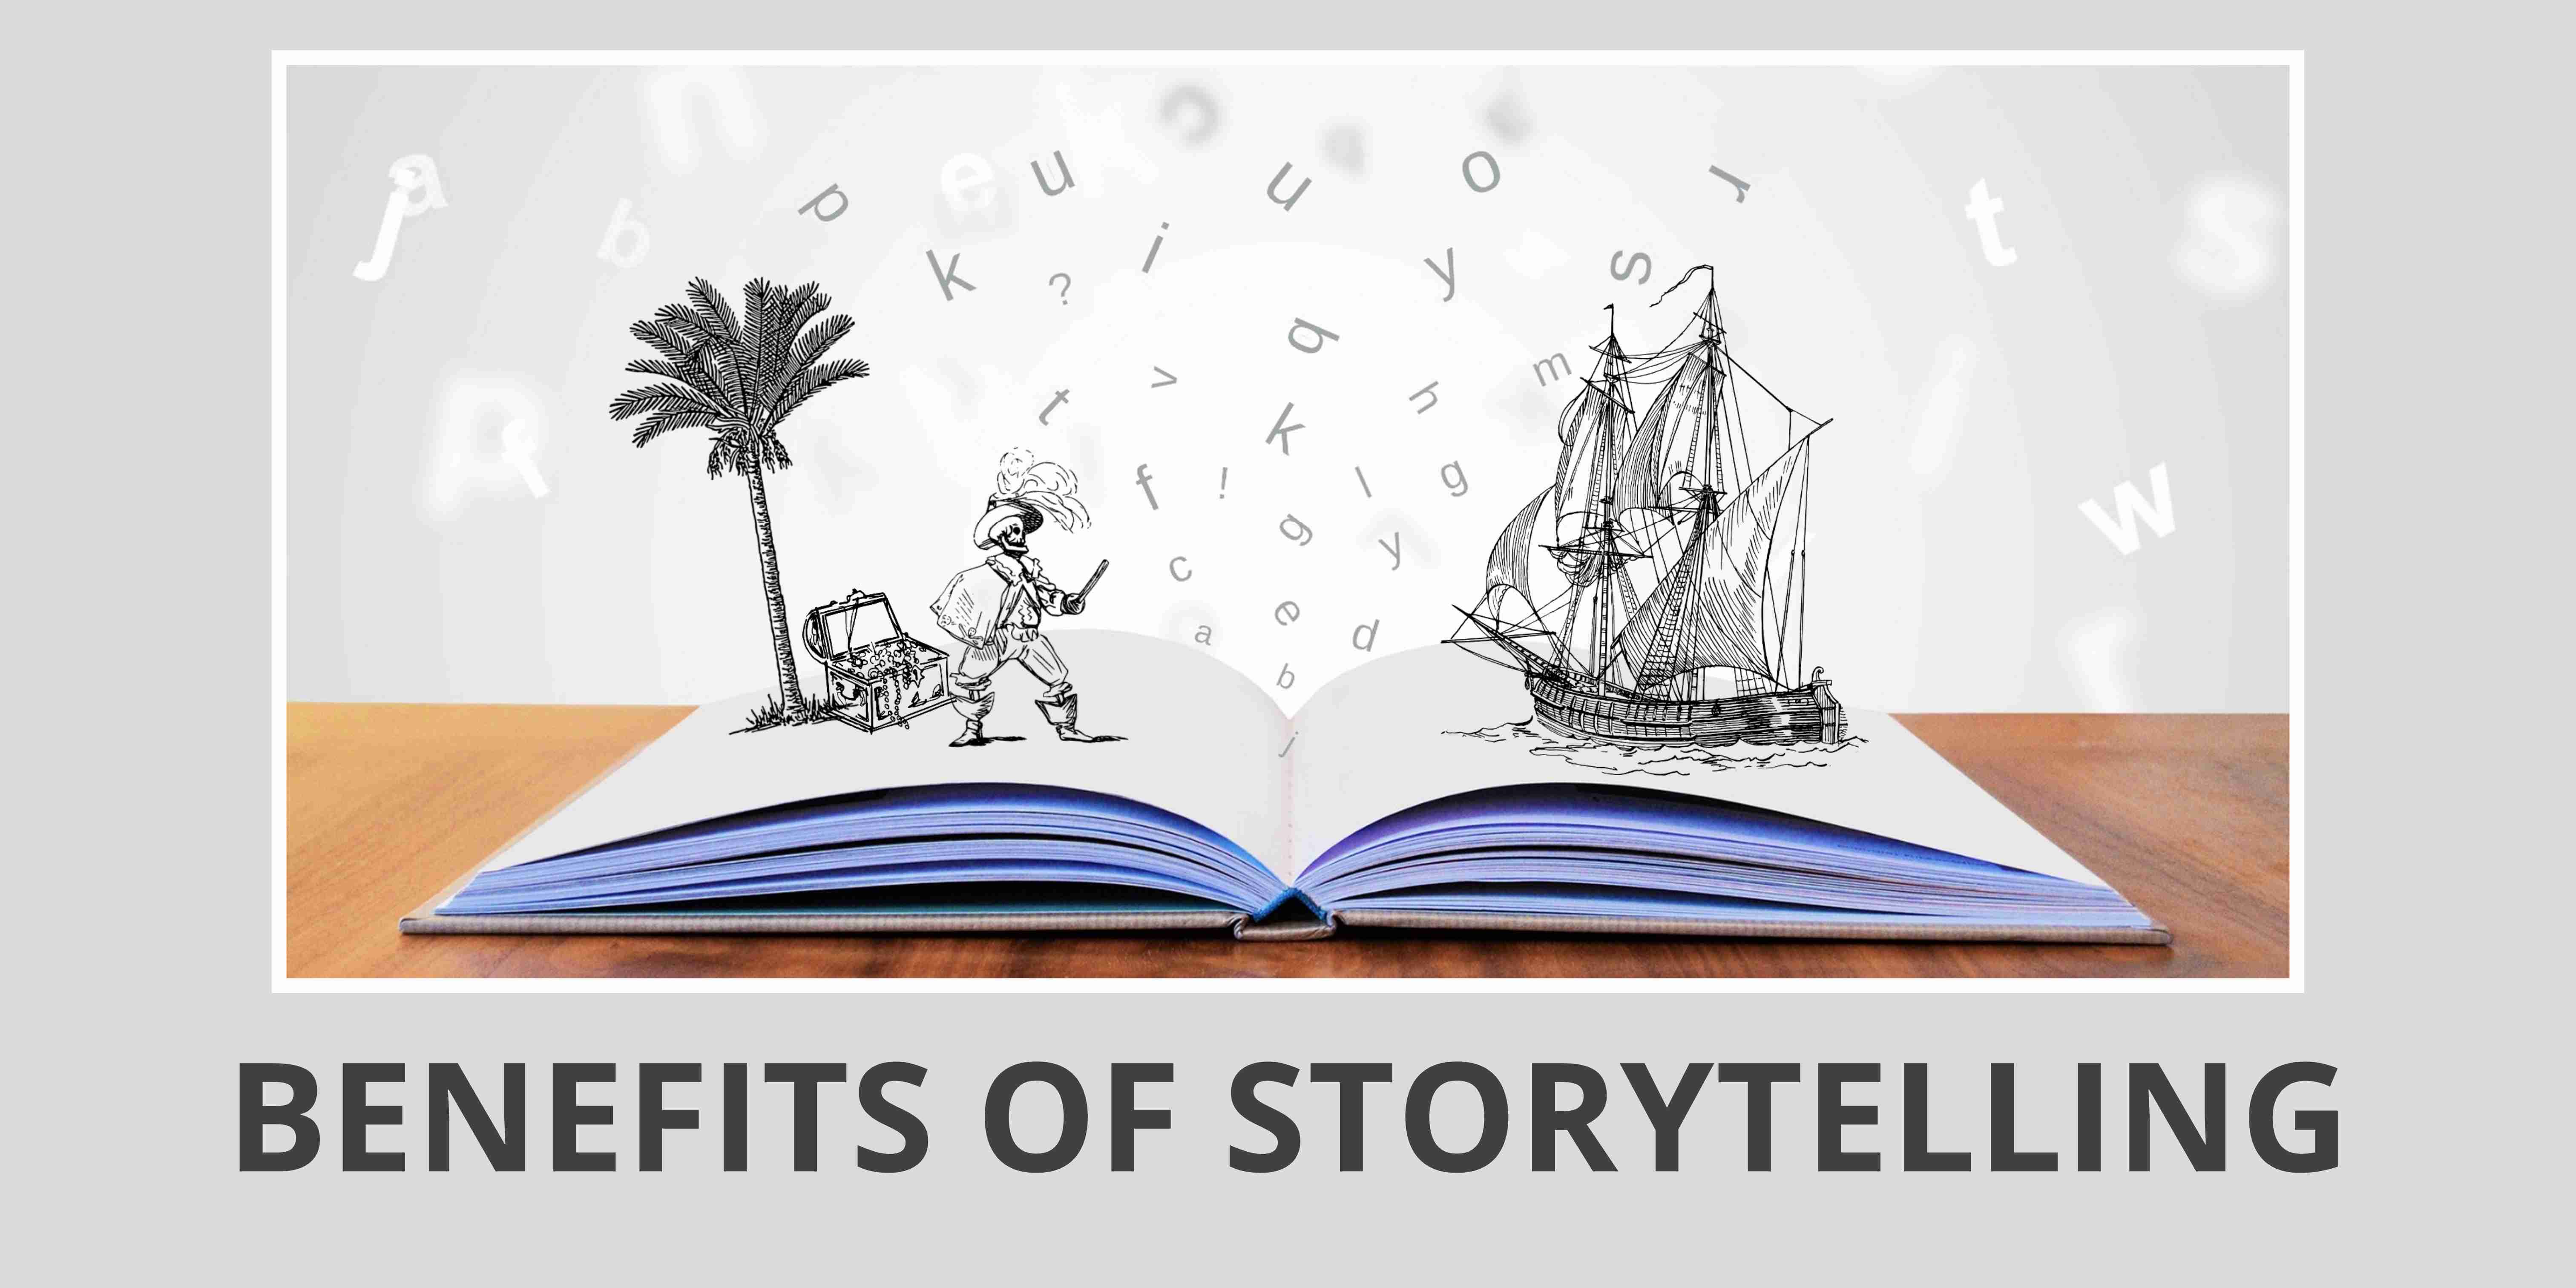 The Benefits of Storytelling: What Happens When You Share Your Story